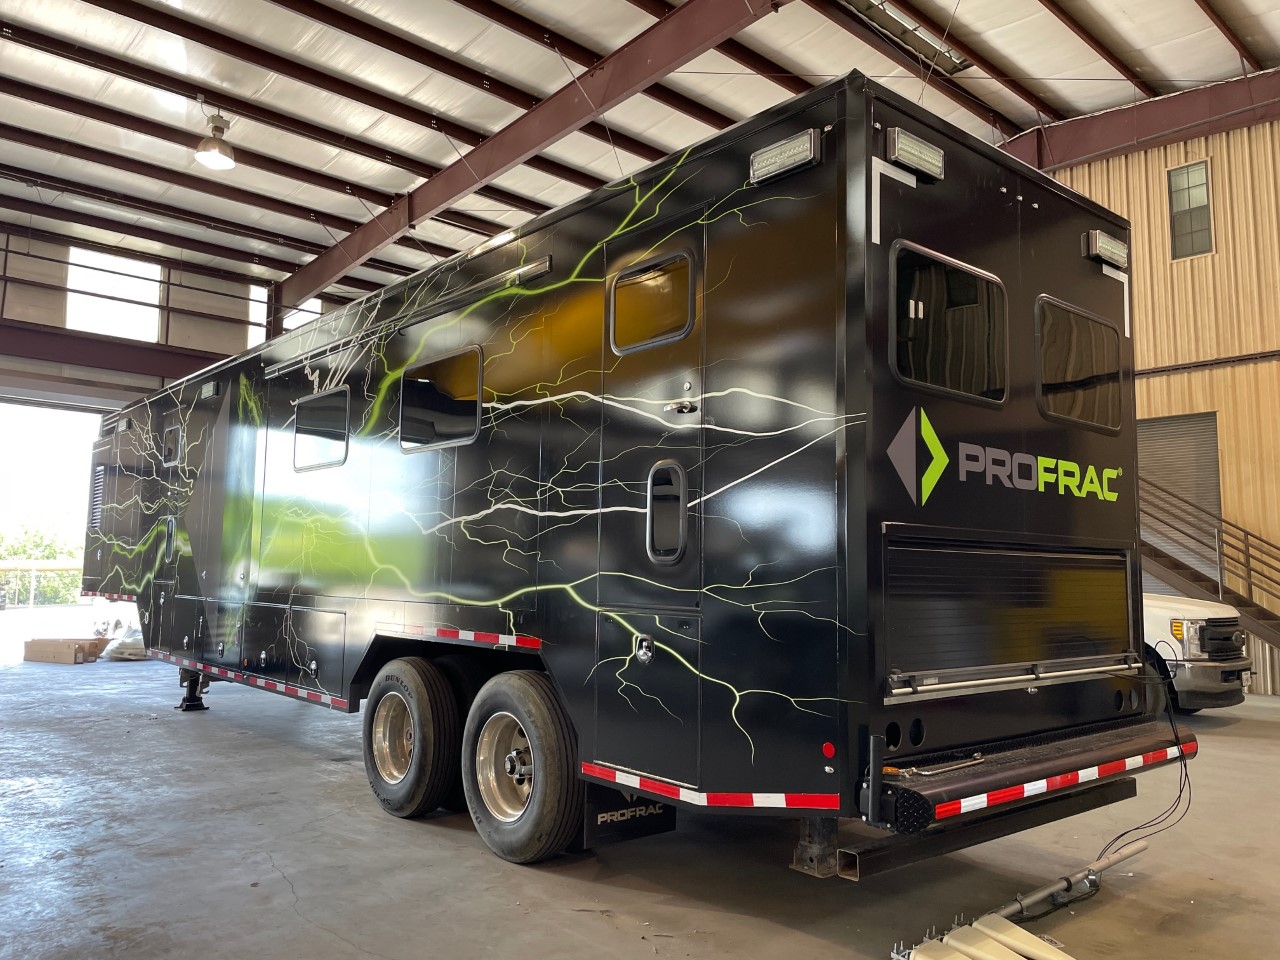 Back side of a 54 foot data trailer with black panel car wrap with company logo and green graphics.